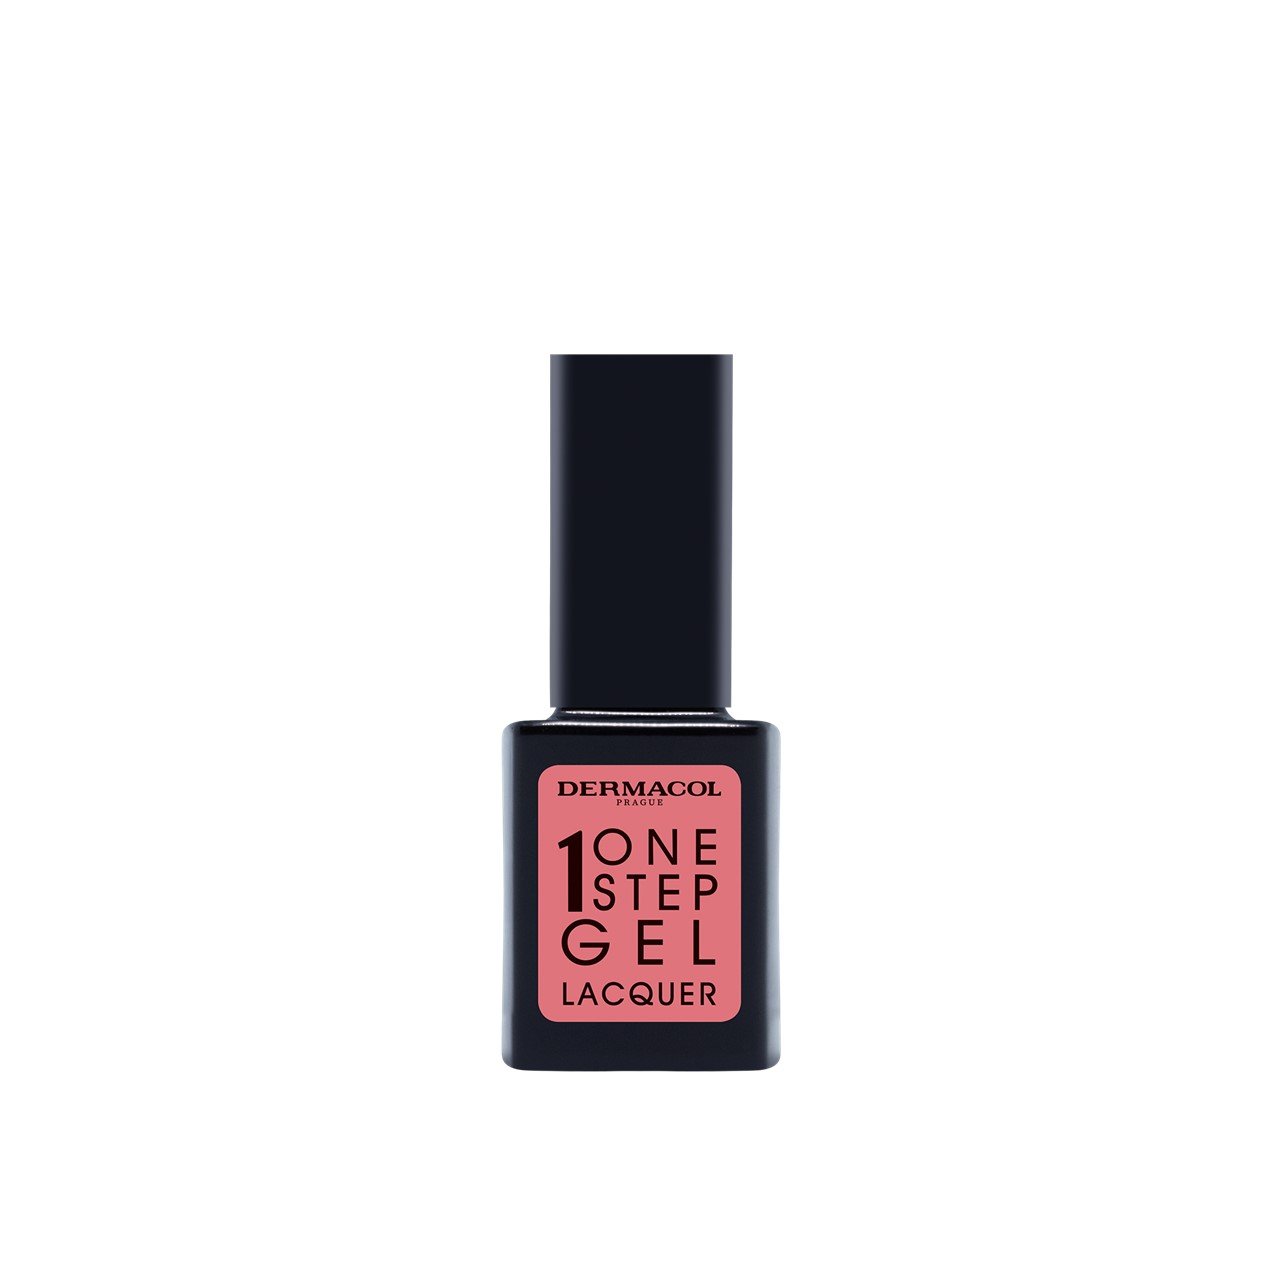 Dermacol One Step Gel Lacquer 02 Ancient Pink 11ml (0.37fl oz)